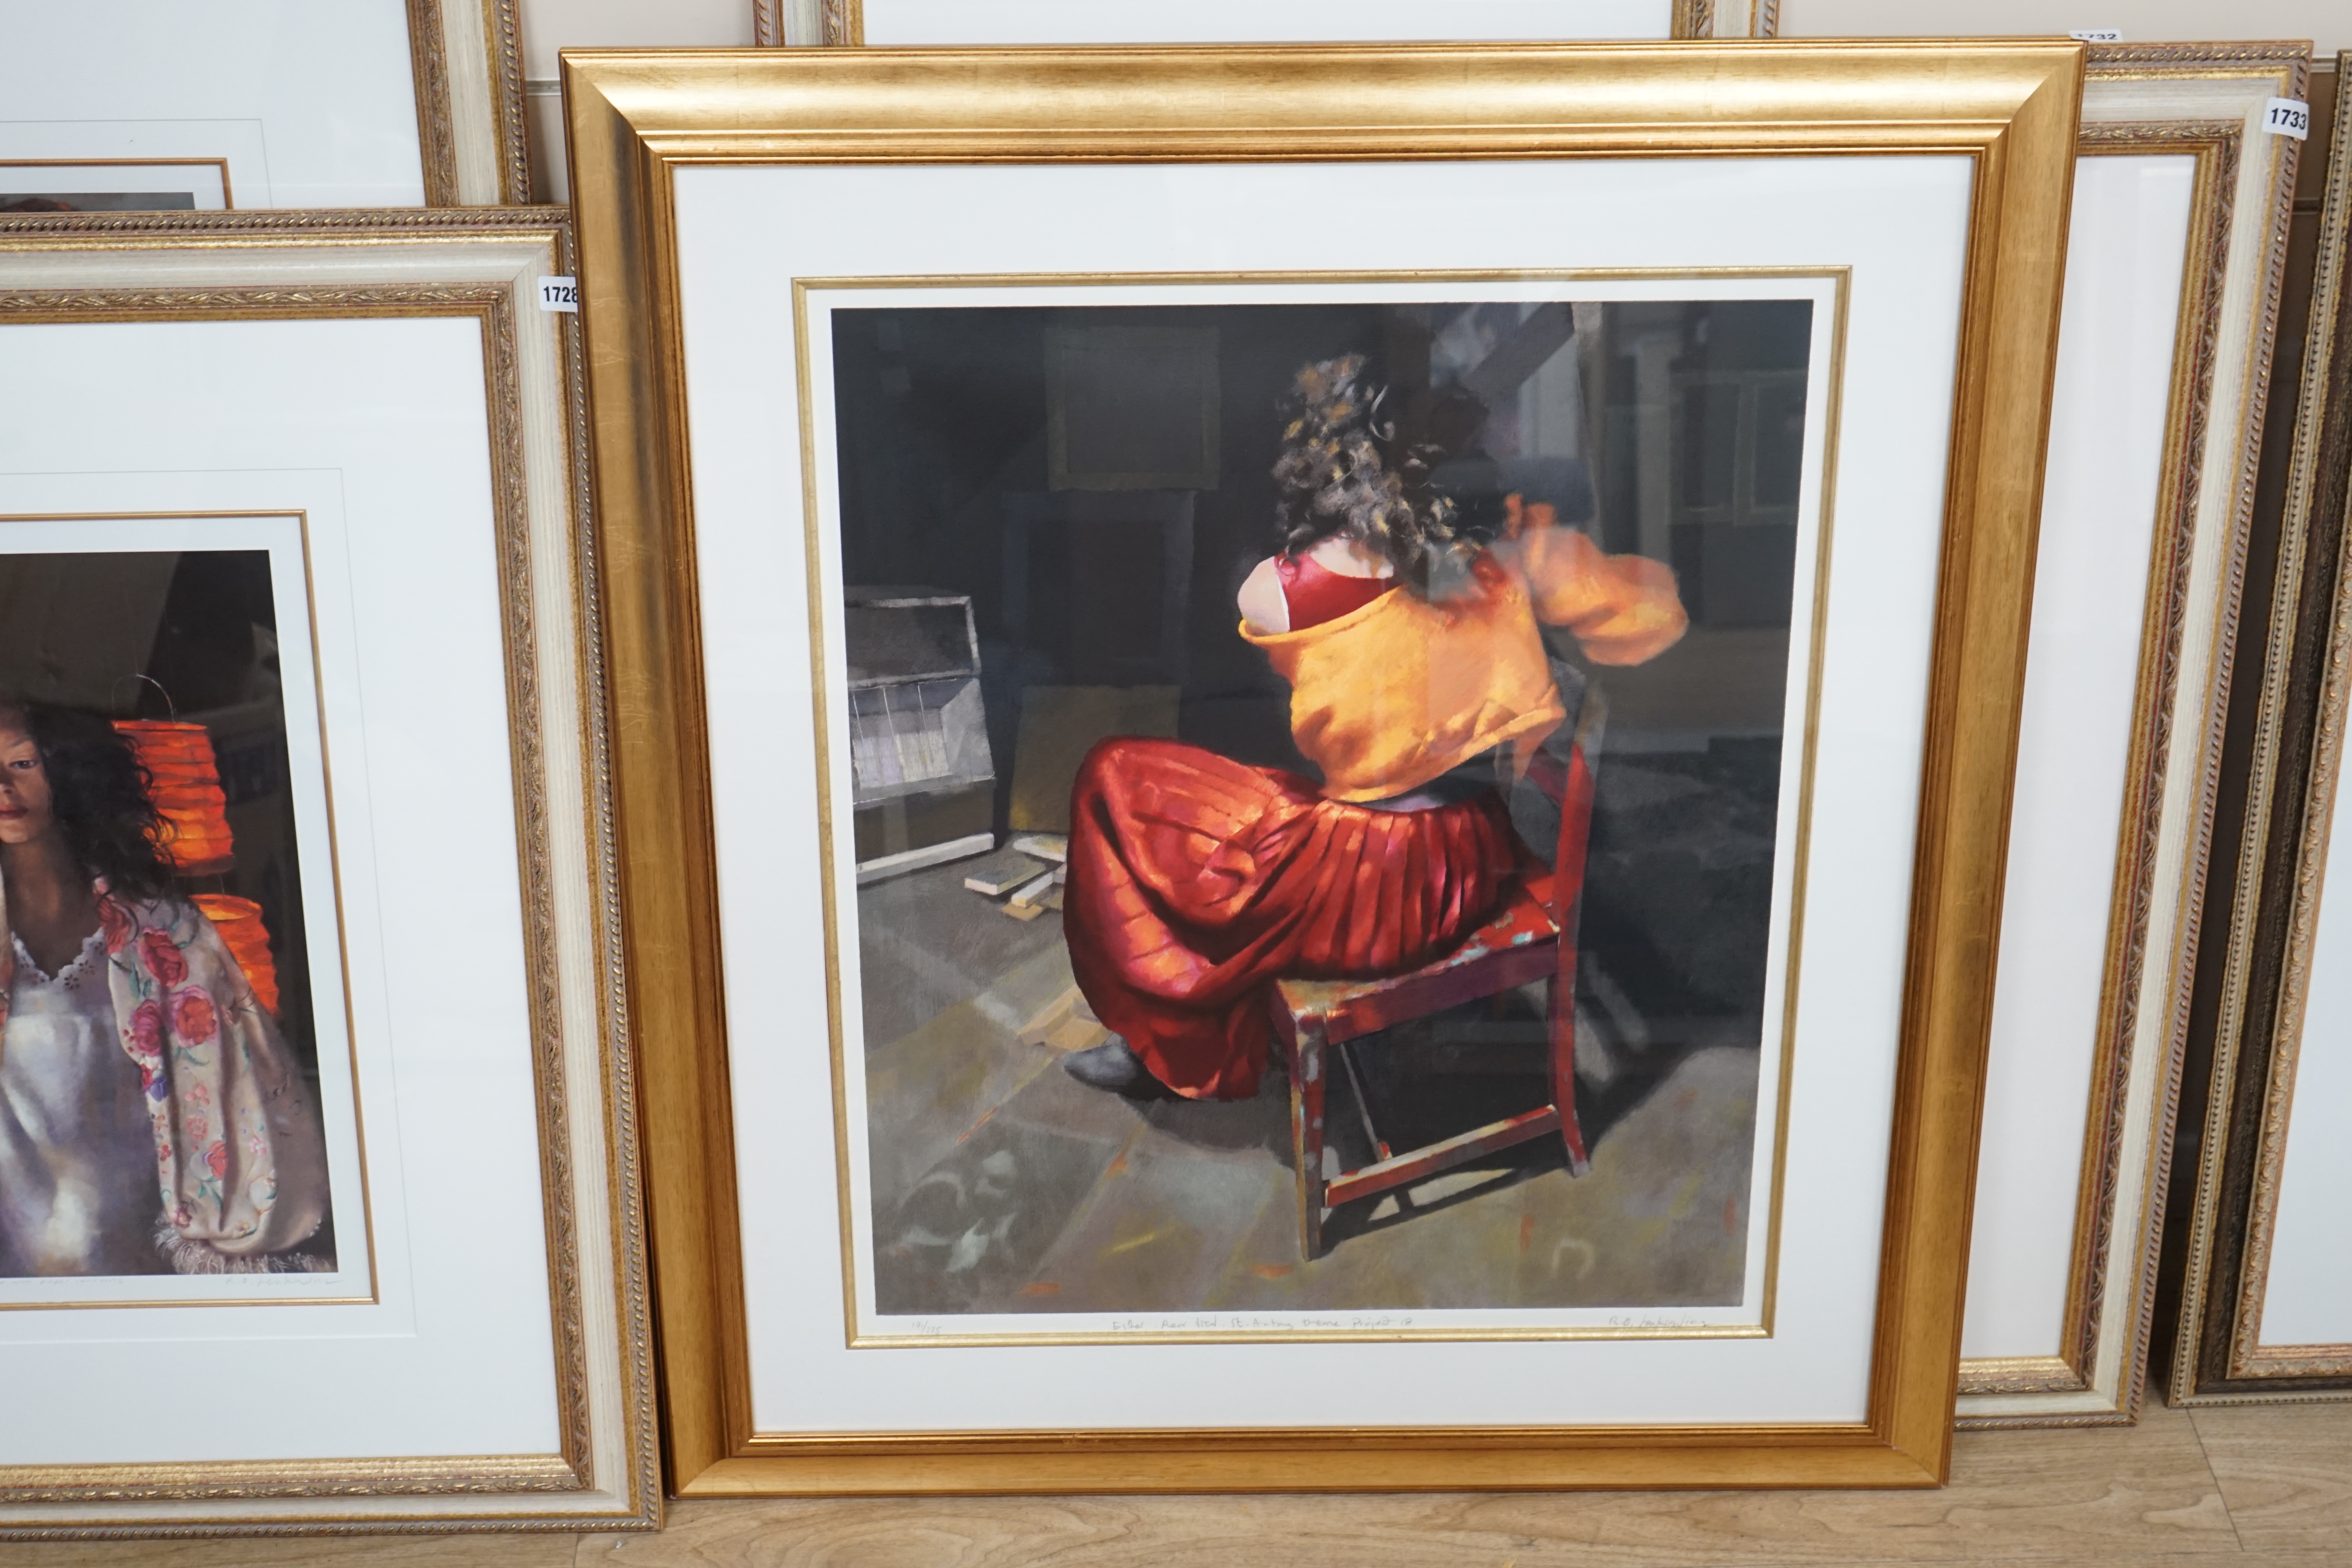 Robert Lenkiewicz (1941-2002), offset lithograph, 'Ester rear view, St Anthony theme - Project 18', signed in pencil, 171/275, 73 x 61.5cm, with COA from Fisher Mackenzie. Condition - good